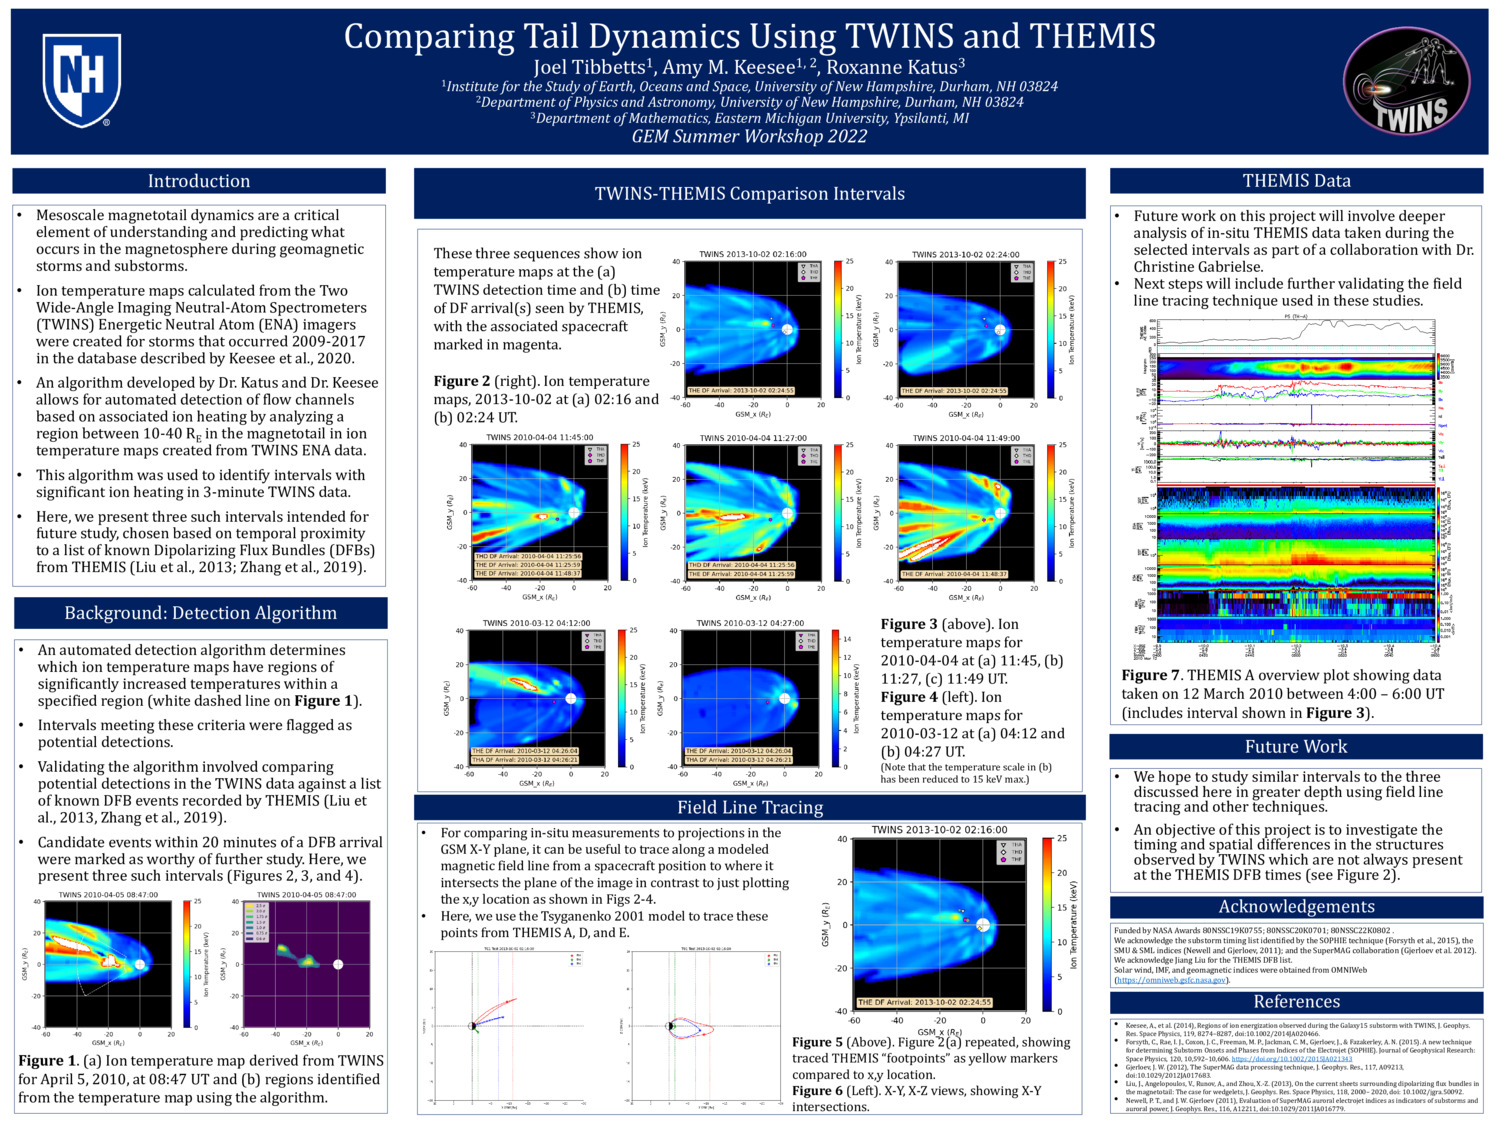 Comparing Tail Dynamics Using Twins And Themis by jt1198